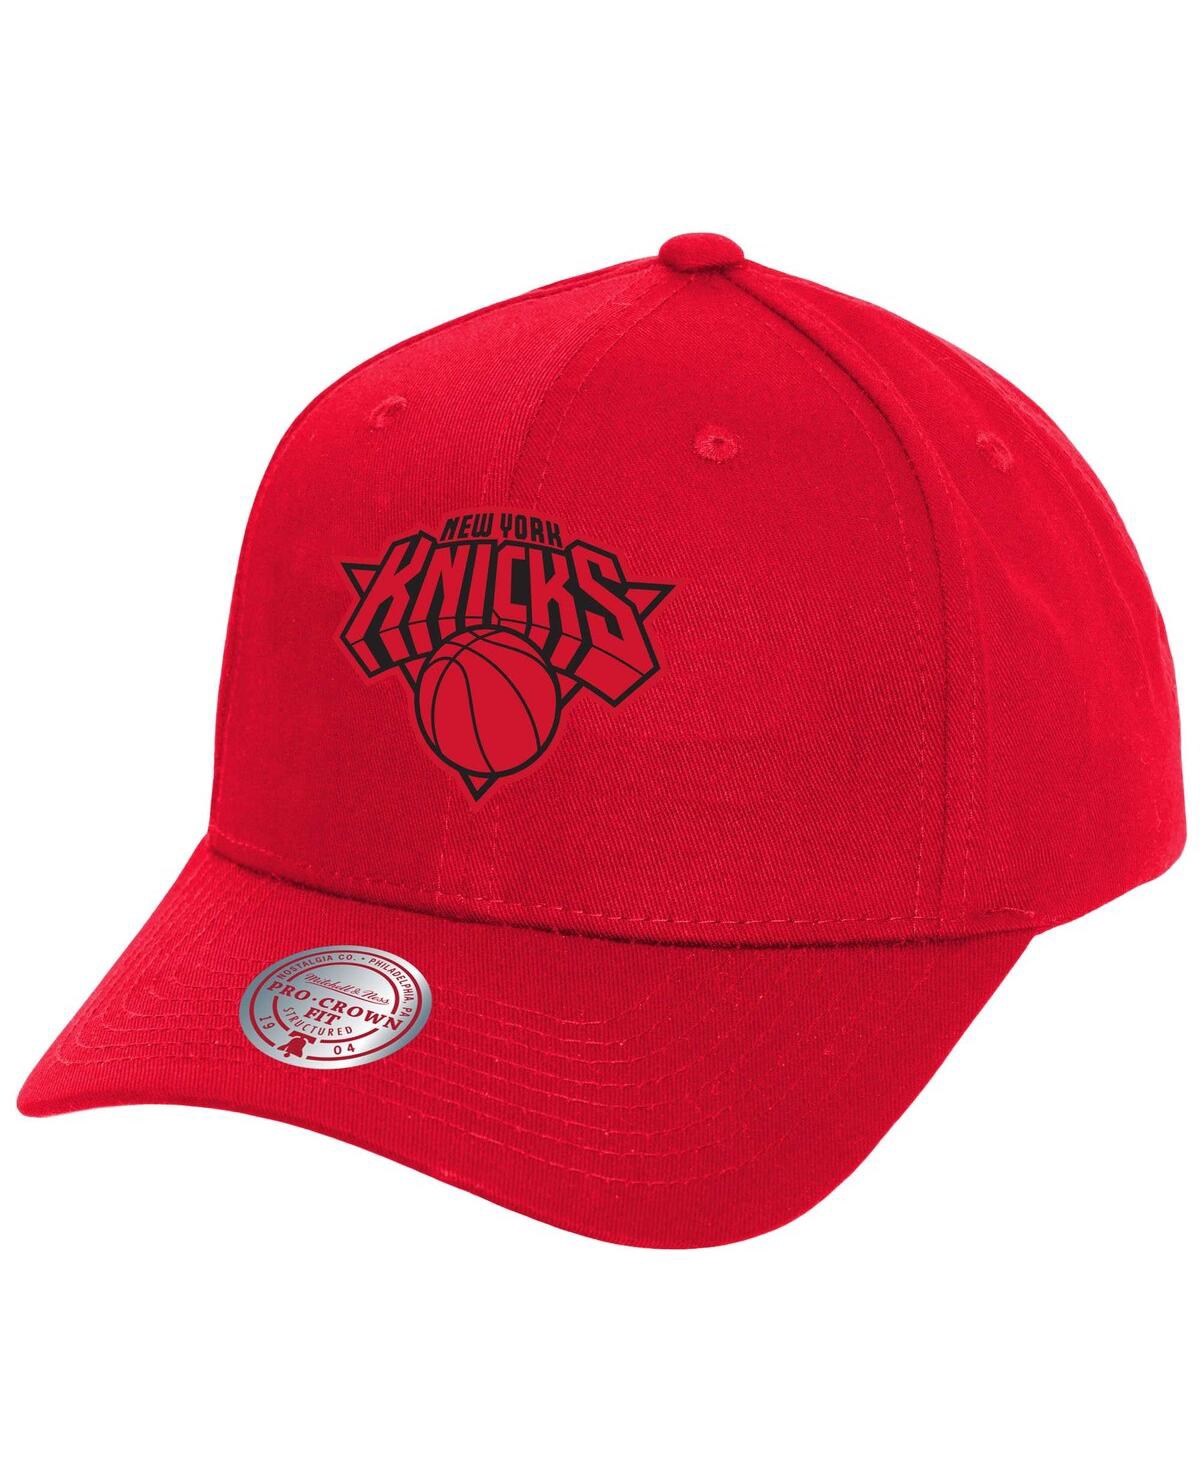 Shop Mitchell & Ness Mitchell Ness Men's Red New York Knicks Fire Red Pro Crown Snapback Hat